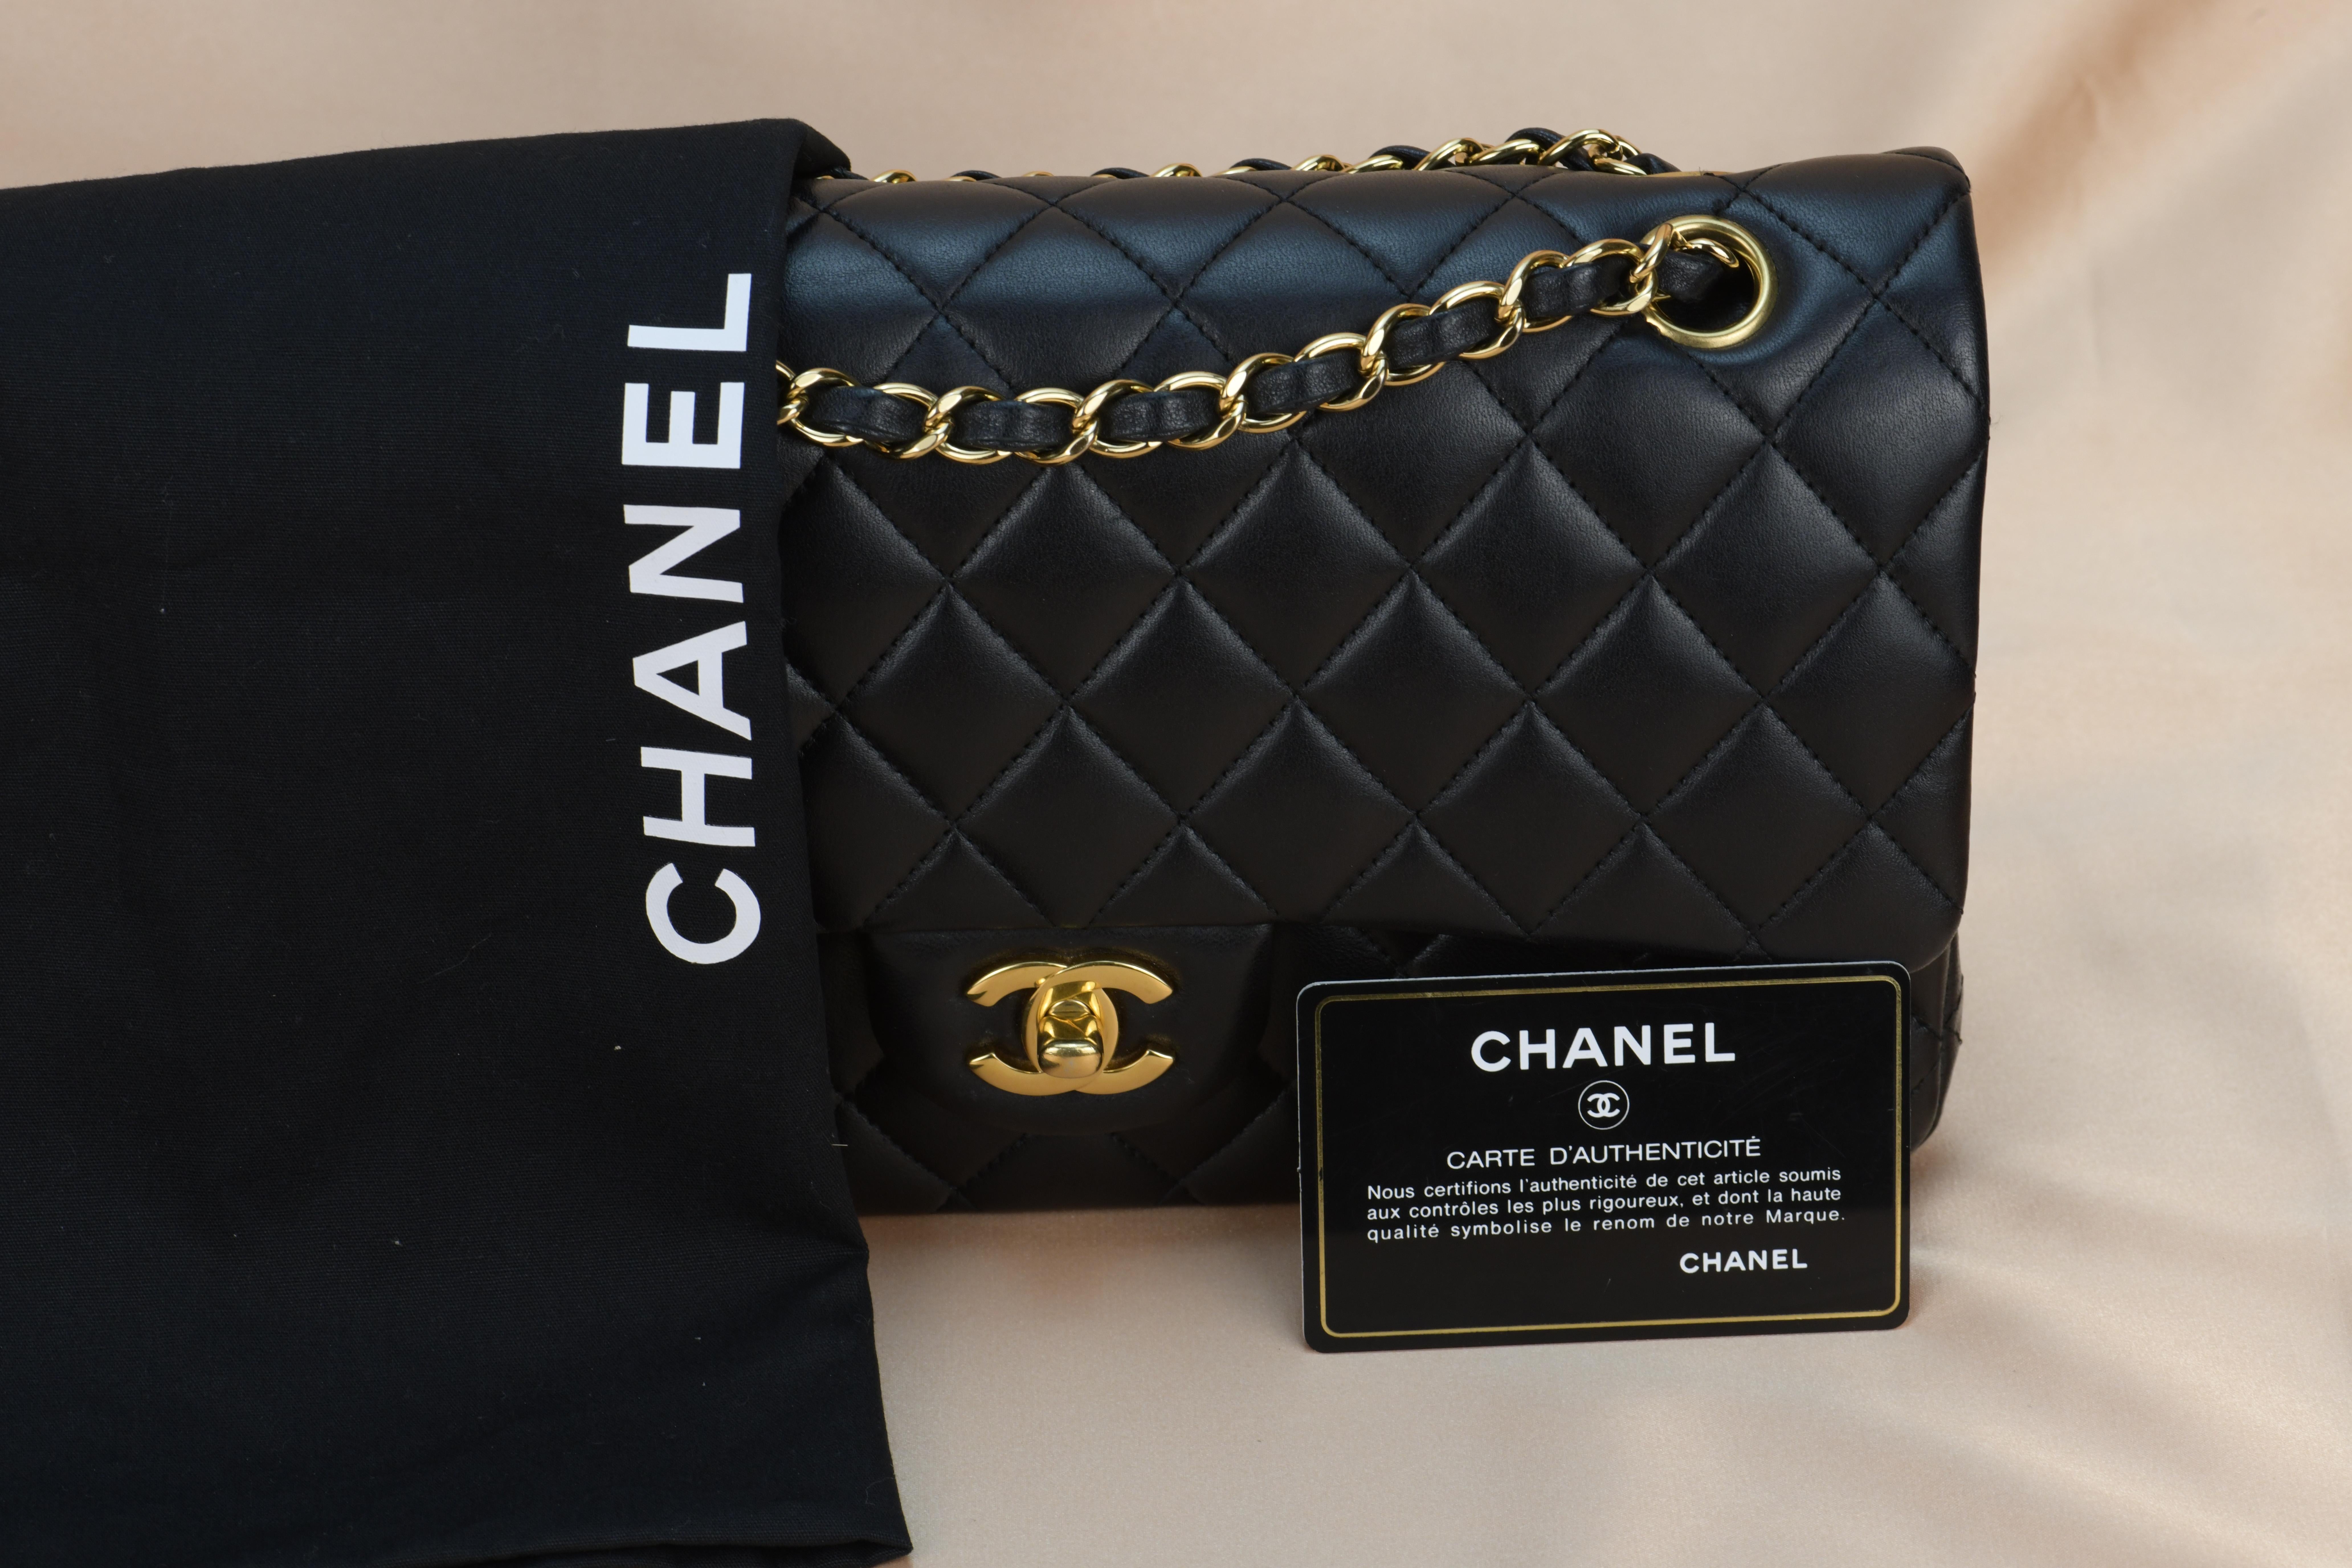 Dandelion Code	AT-1203
Brand	Chanel
Model	Timeless Classic Double Flap 
Serial No.	21******
Color	Black
Date	Approx. 2015-2016
Metal	Gold
Material	Lambskin Leather
Measurements	Approx. 10in L x 2.5in W x 6.5in H
Condition	Excellent 
Comes